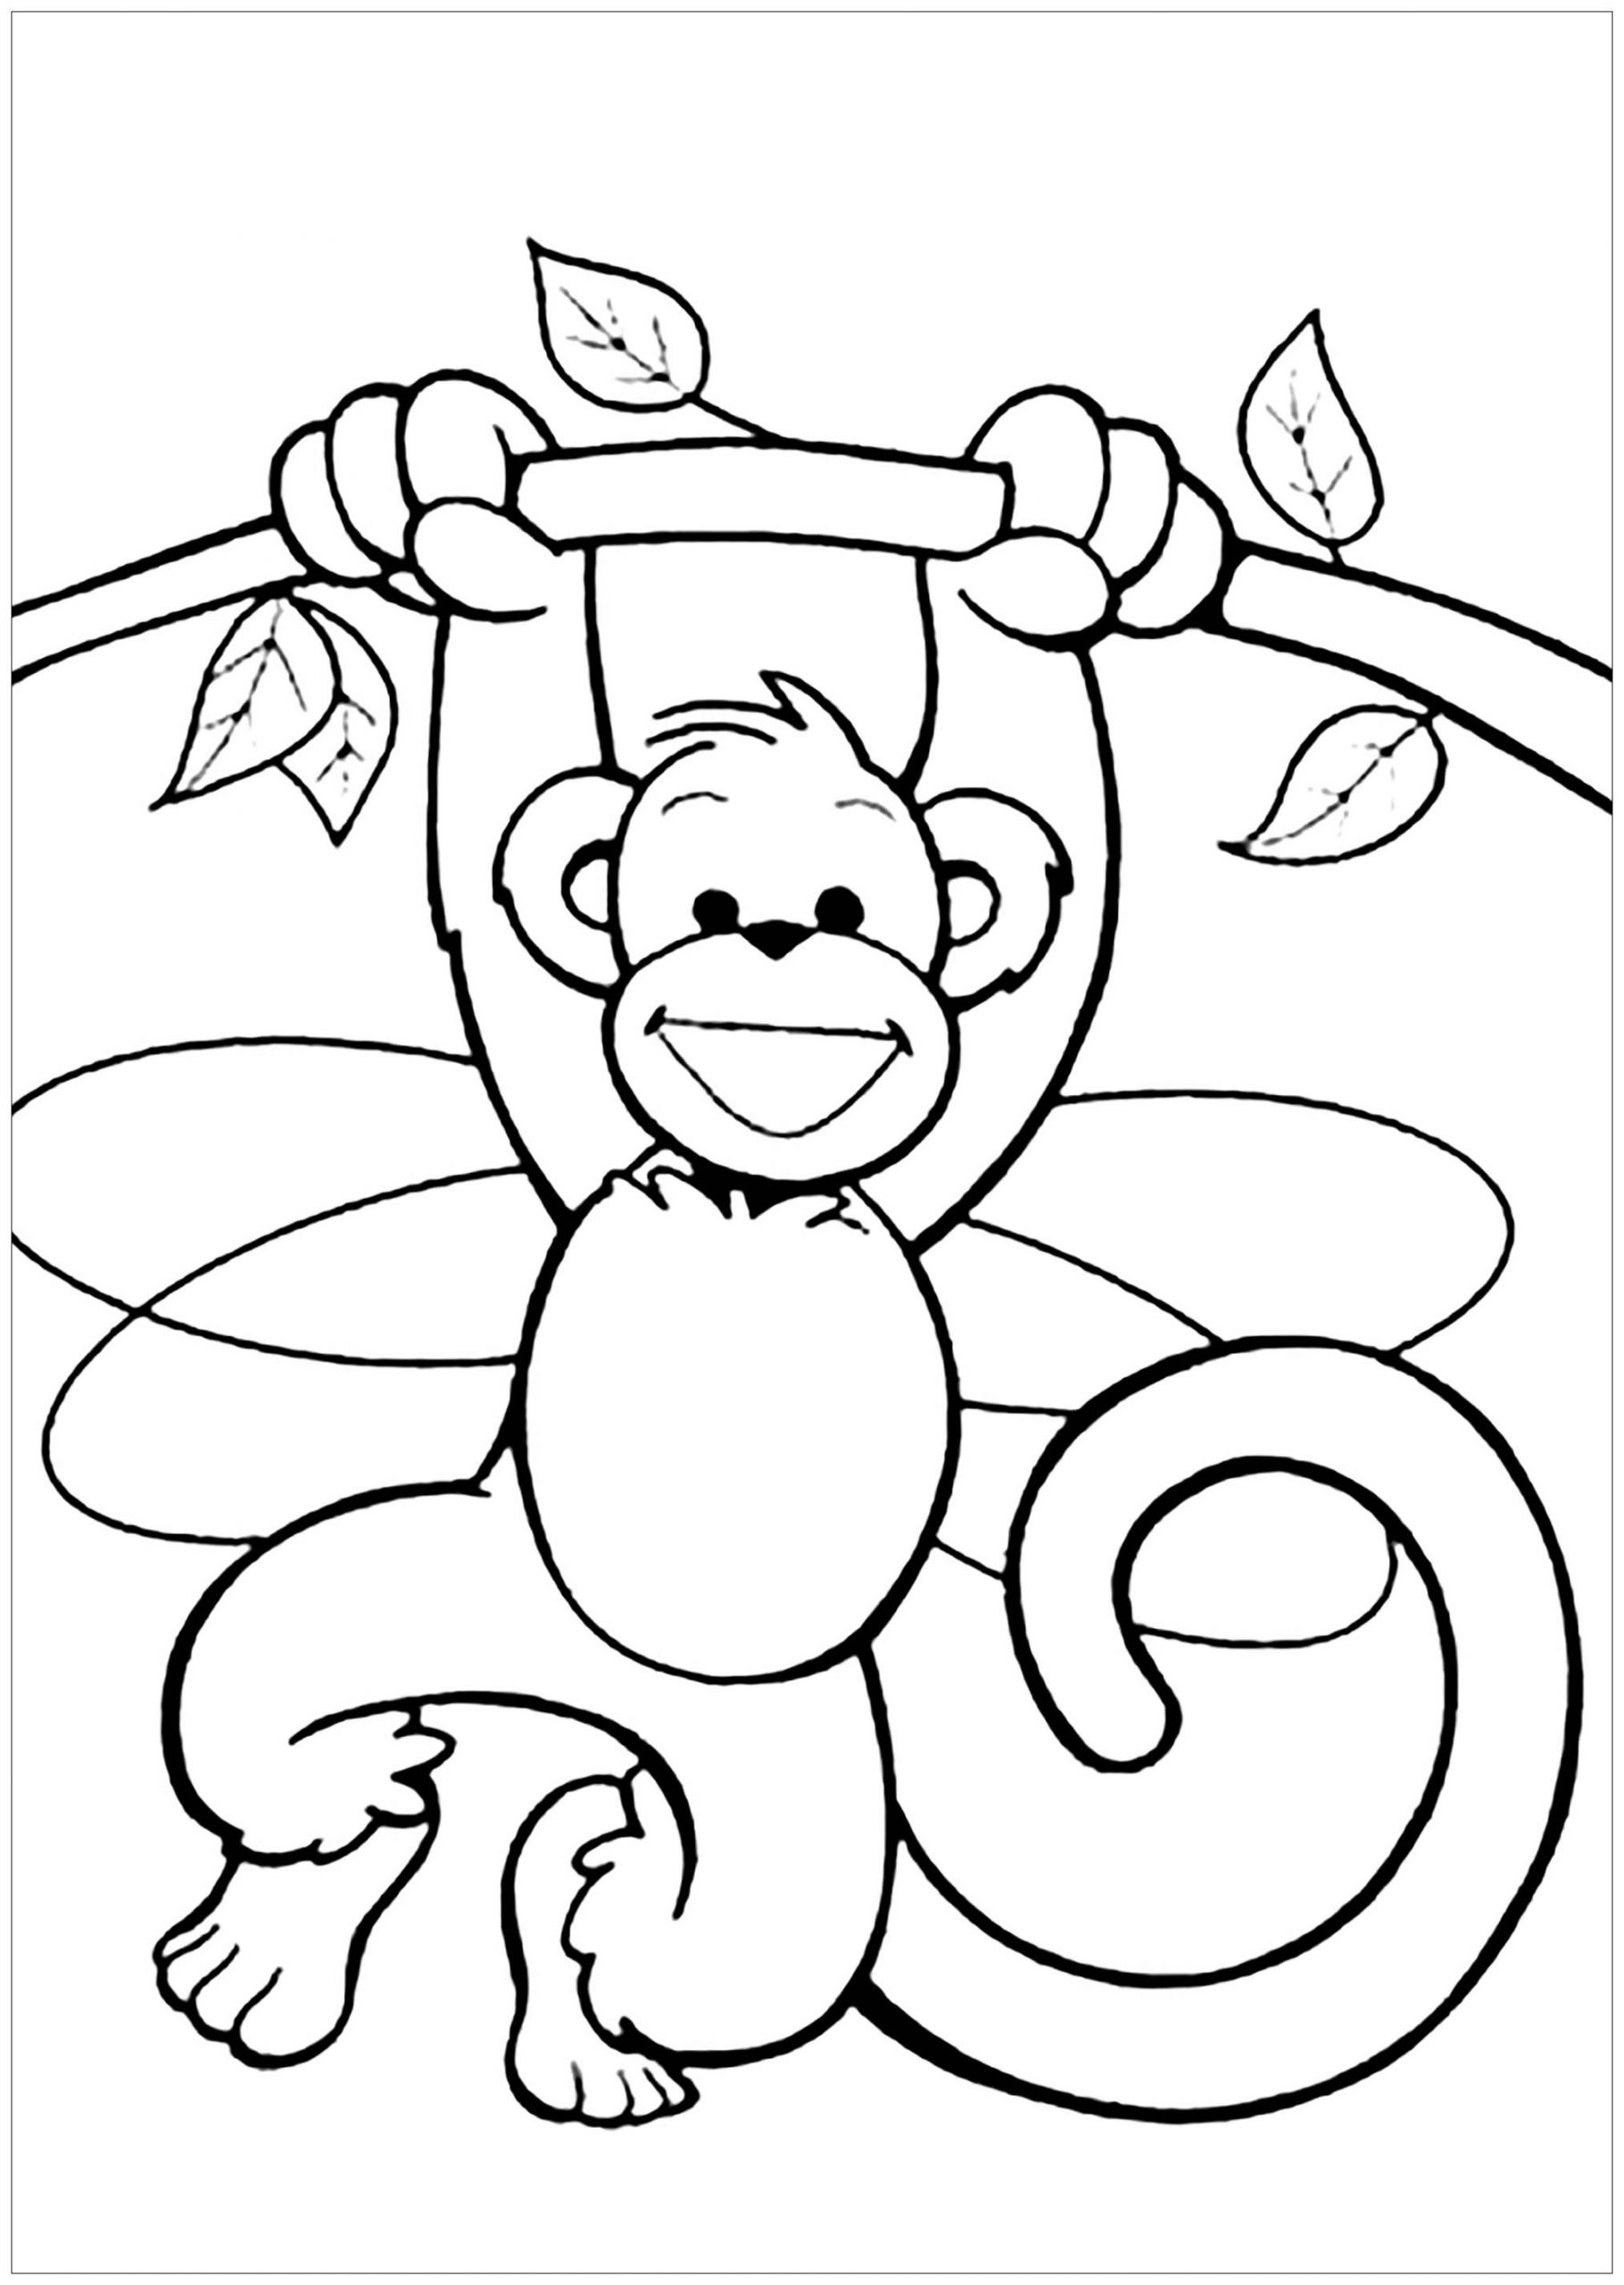 Kids Coloring Sheets
 Monkeys to for free Monkeys Kids Coloring Pages